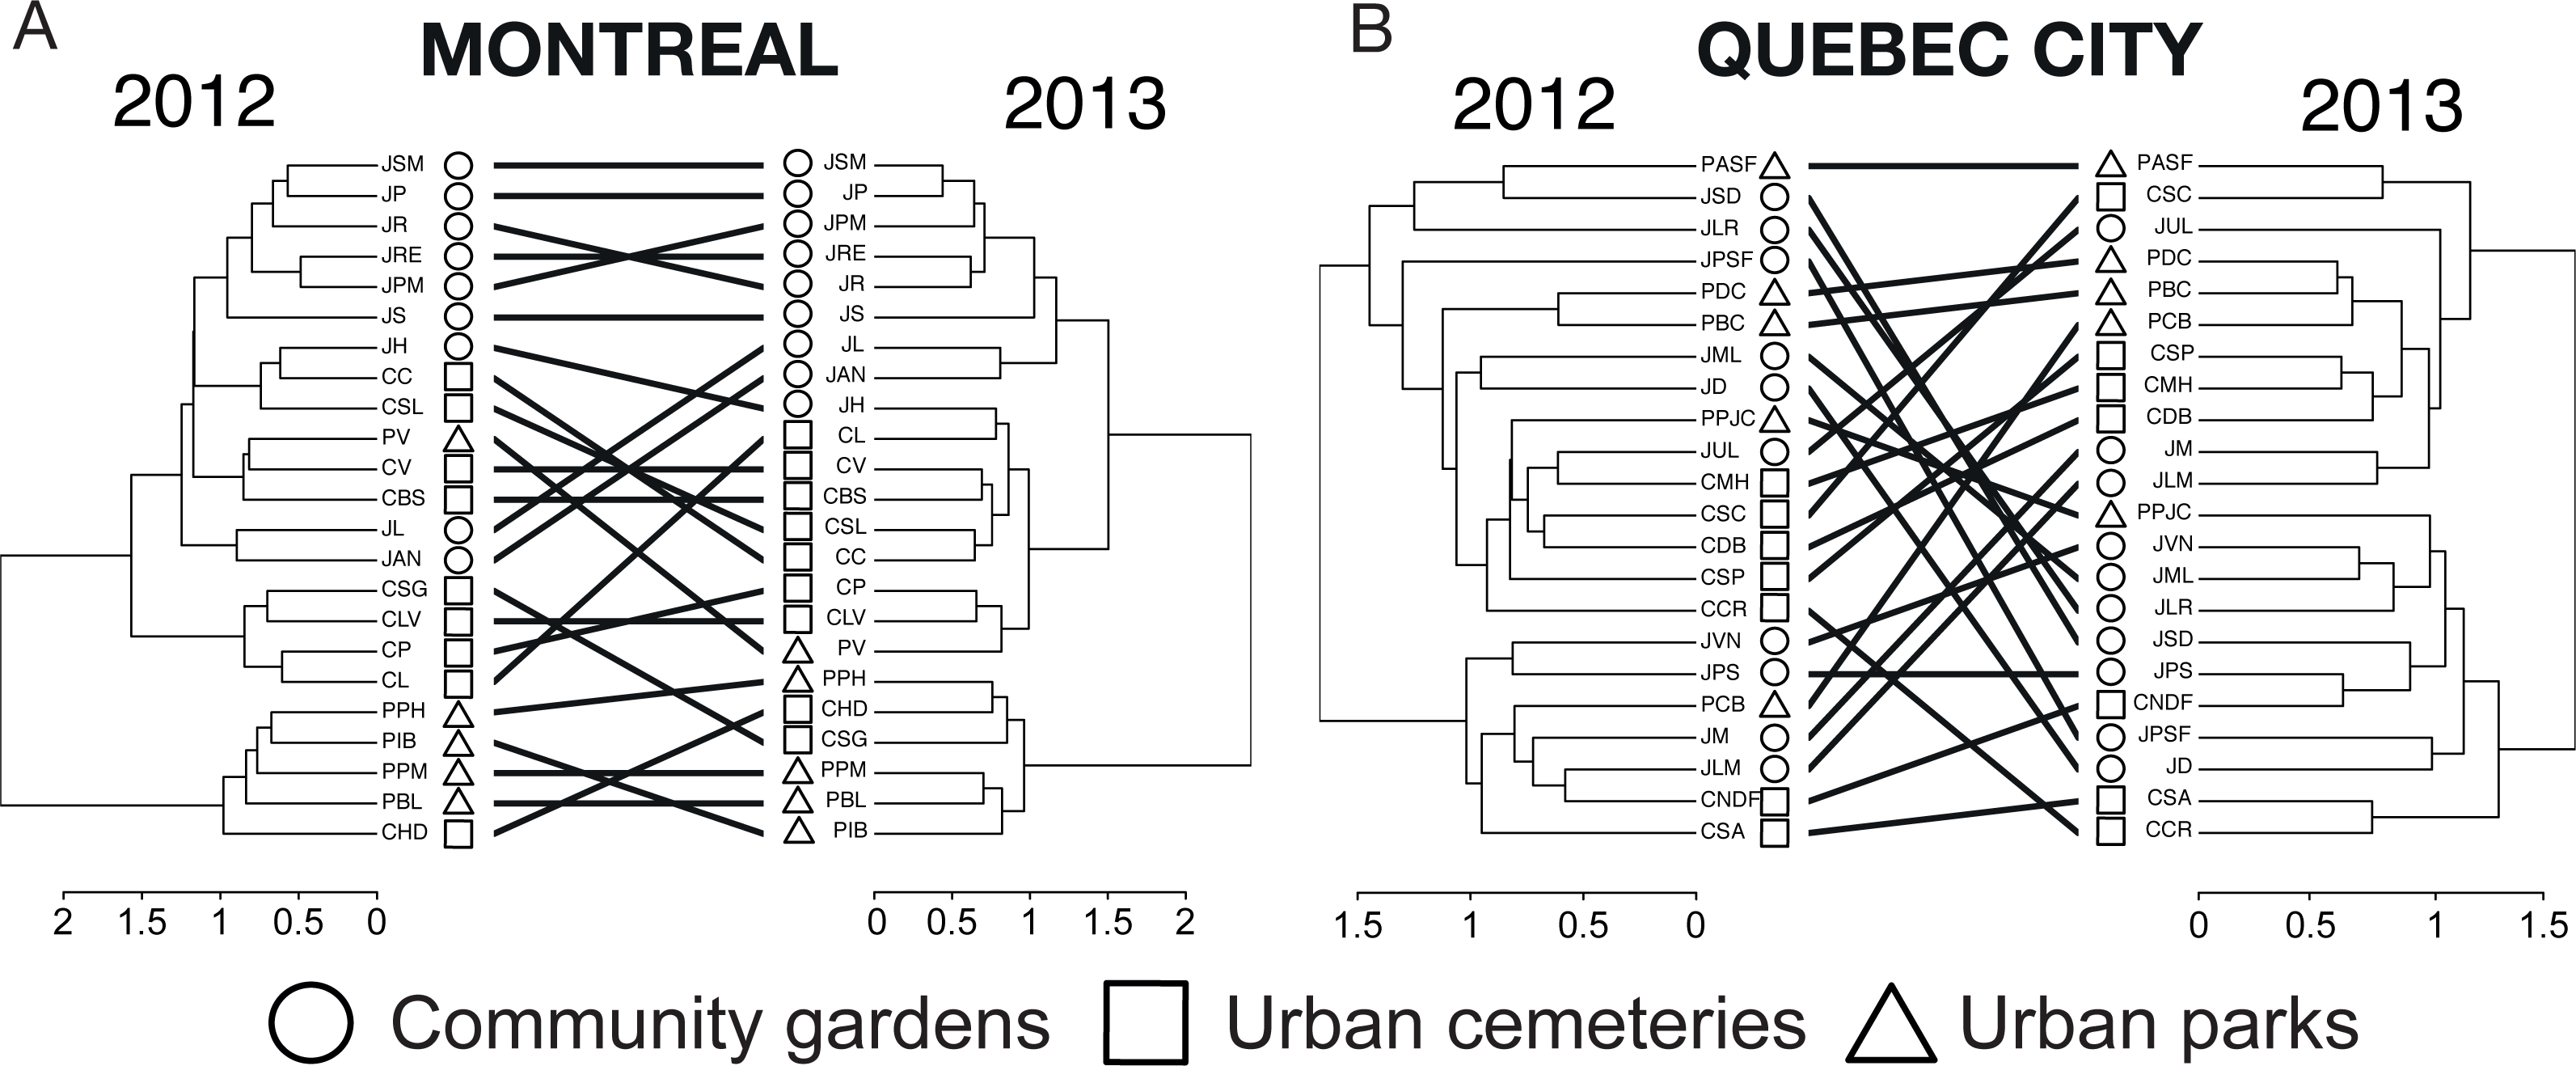 Taxonomic And Functional Trait Diversity Of Wild Bees In Different